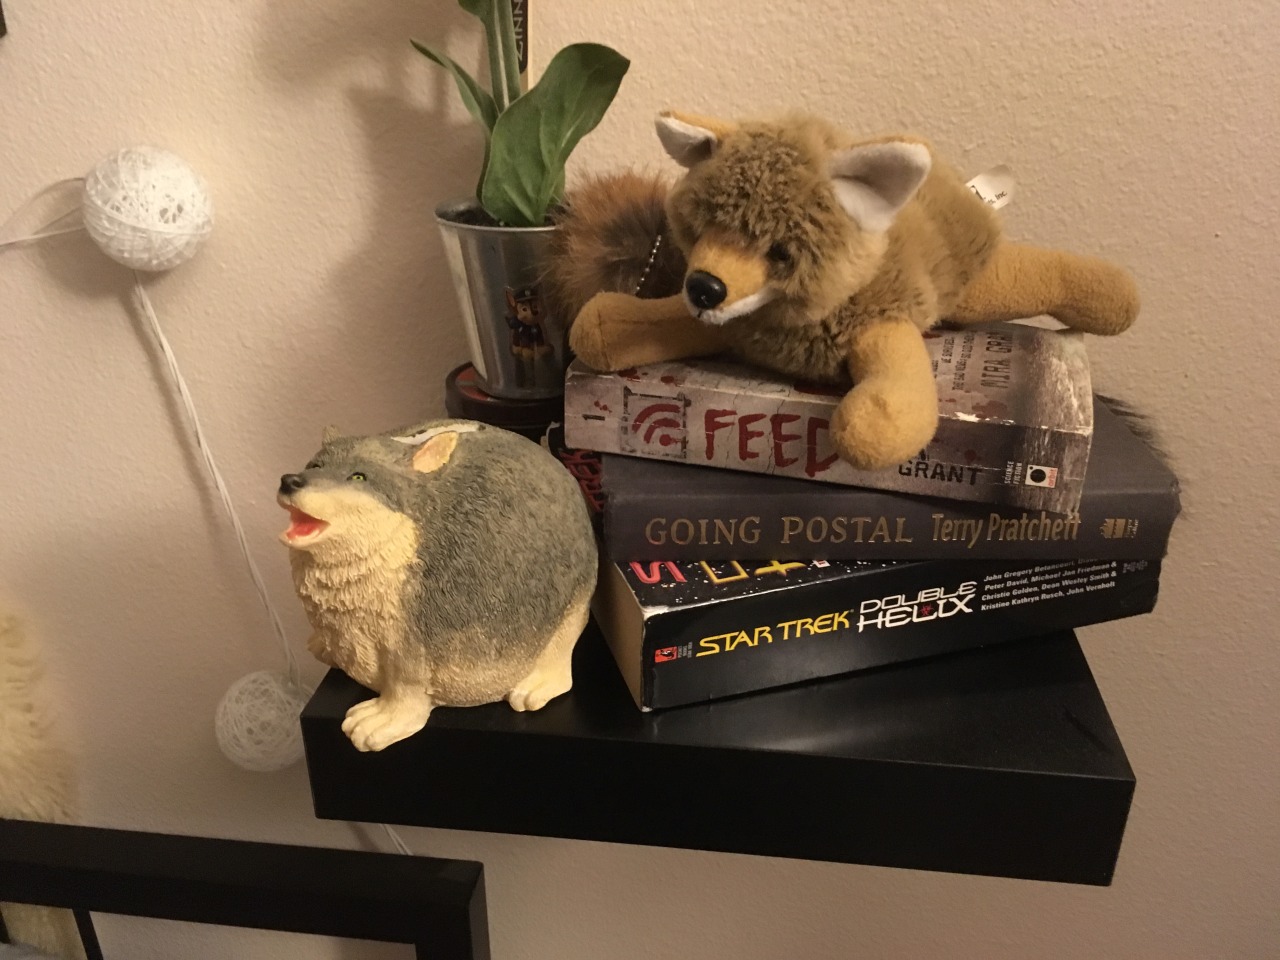 good-dog-girls:My wife bought me this extremely round coyote bank. It is the roundest